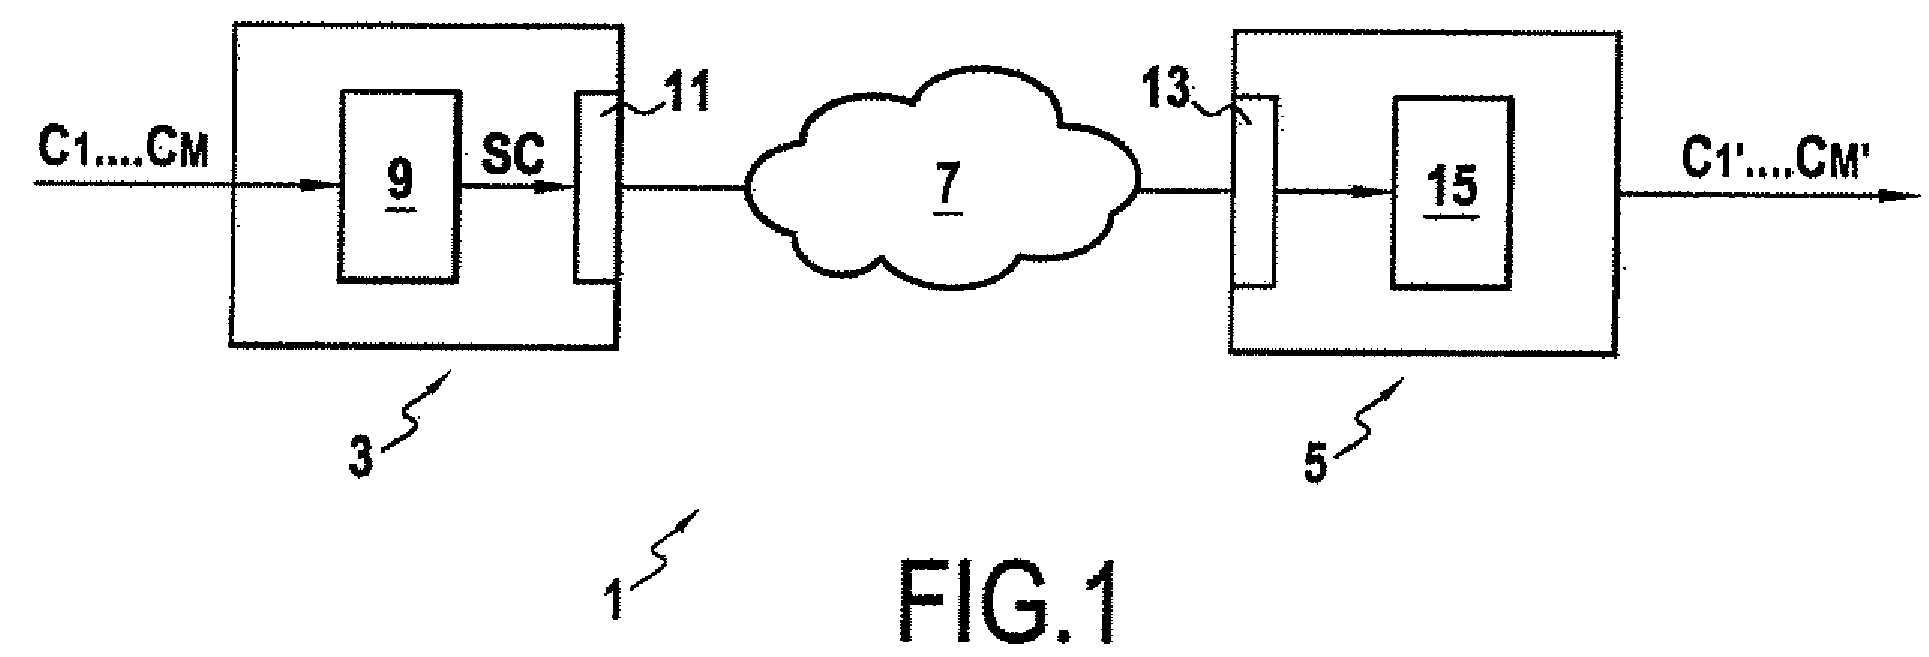 Device and Method for Graduated Encoding of a Multichannel Audio Signal Based on a Principal Component Analysis